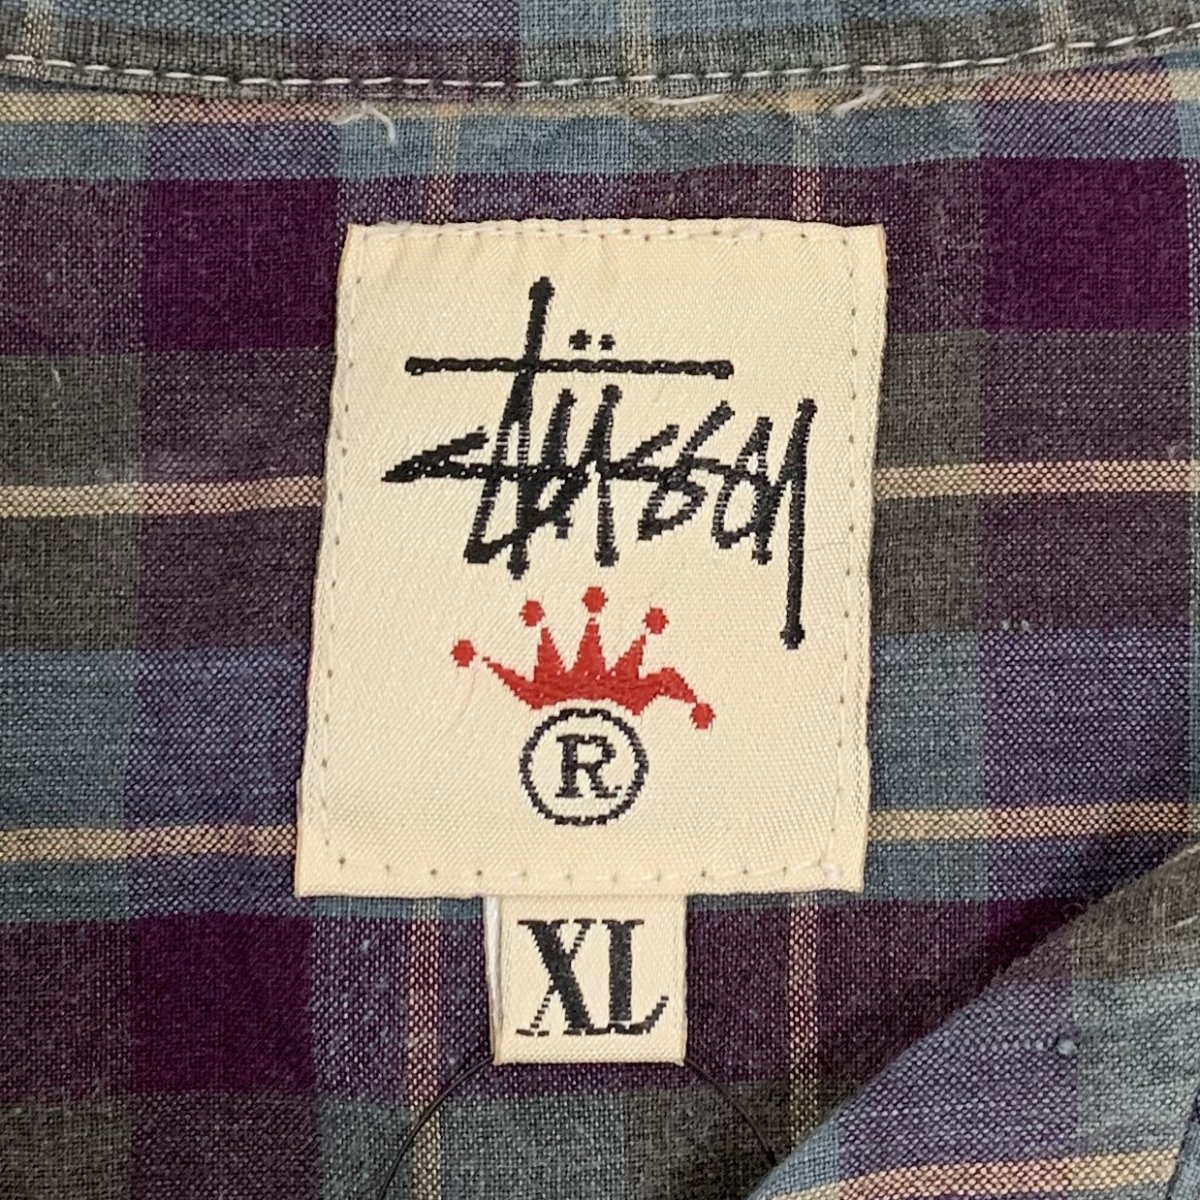 USA製 90s OLD STUSSY Check Cotton Open Collar S/S Shirt 紫 XL 白 ...